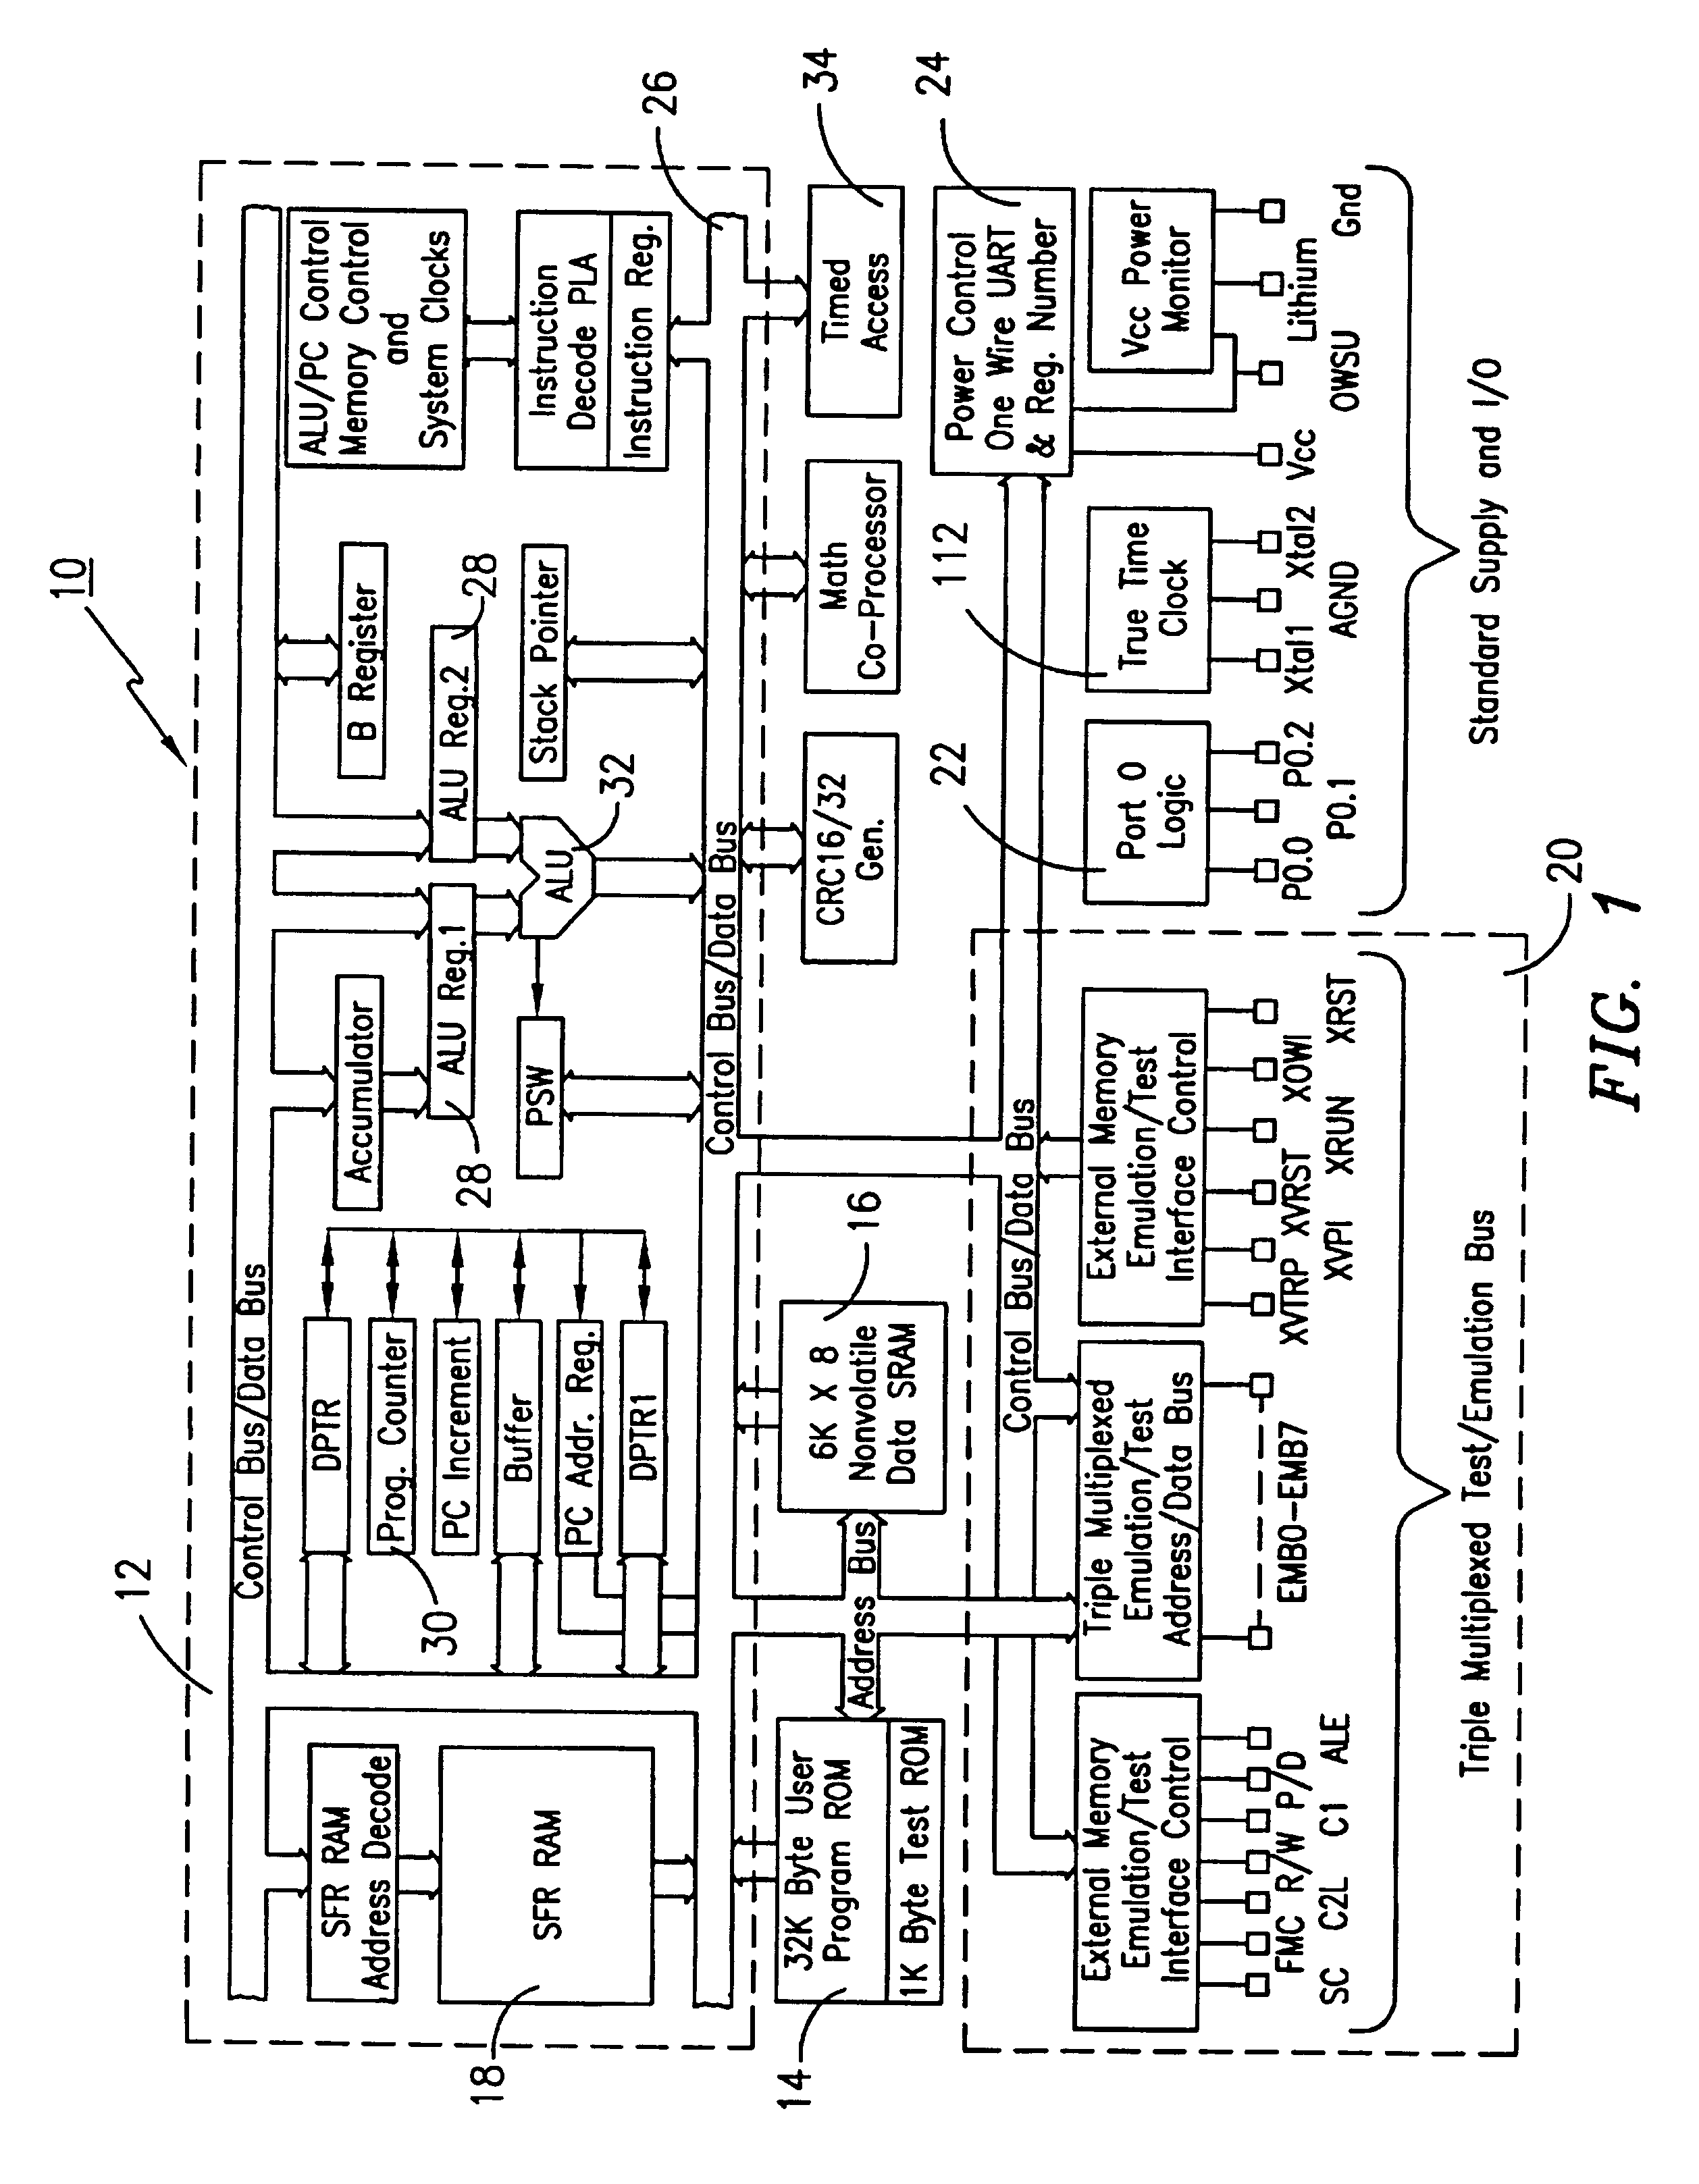 Microprocessor with coprocessing capabilities for secure transactions and quick clearing capabilities